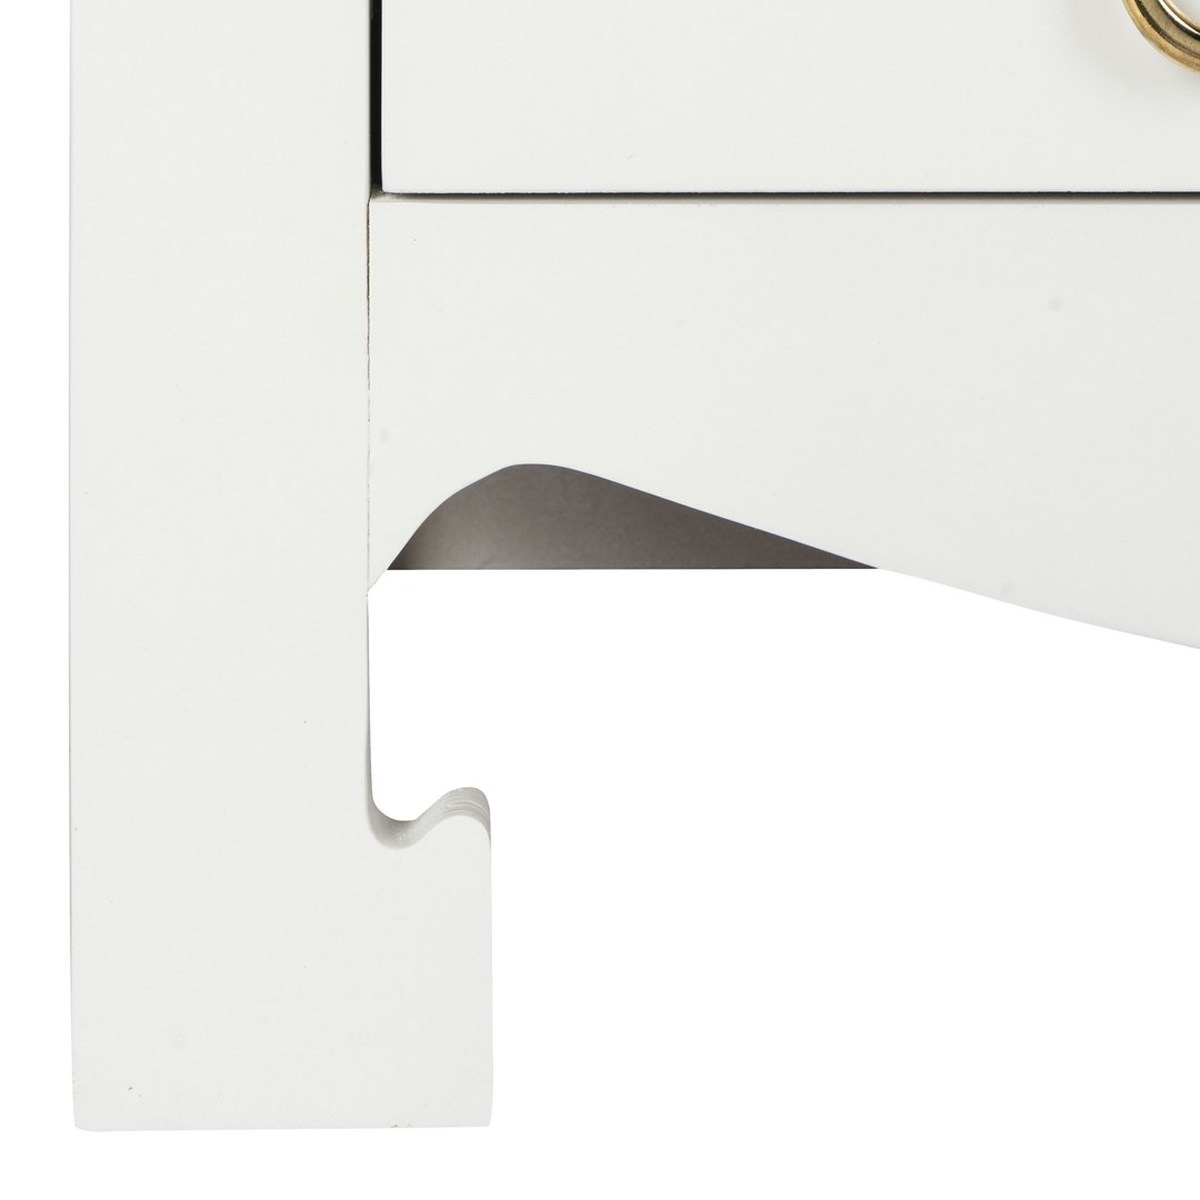 Dion 3 Drawer Chest - White/Gold - Arlo Home - Image 5